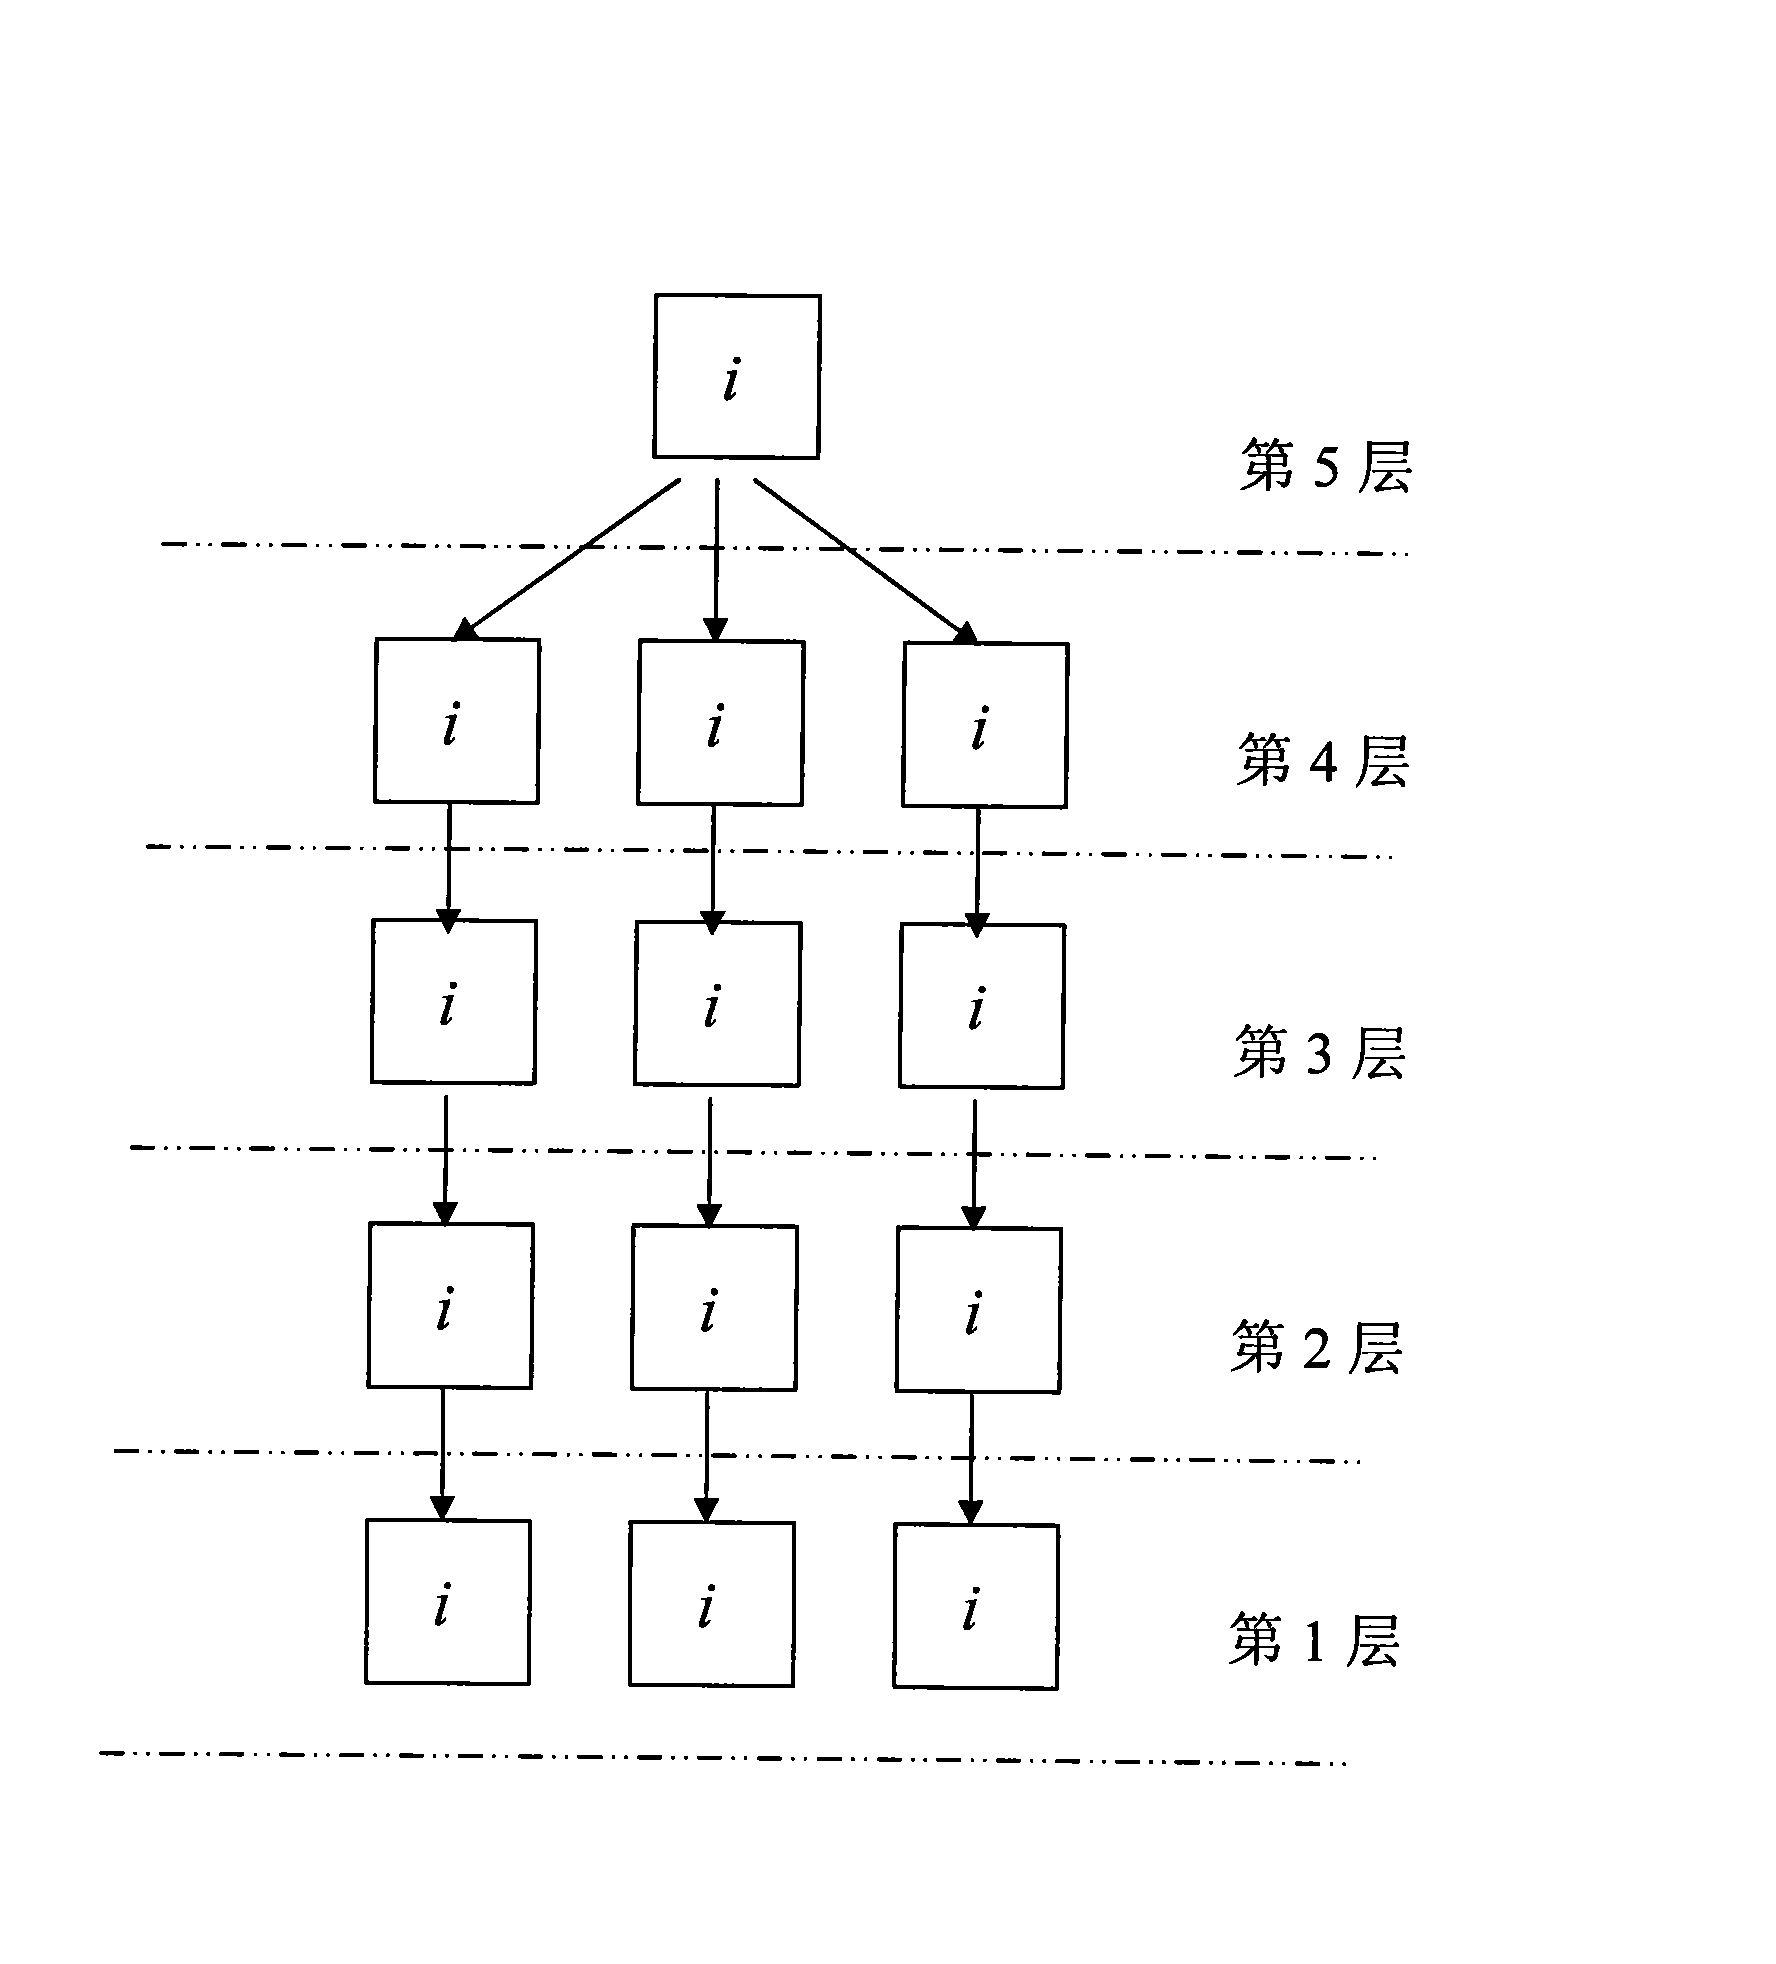 Image retrieval and filter apparatus based on image wavelet feature and method thereof